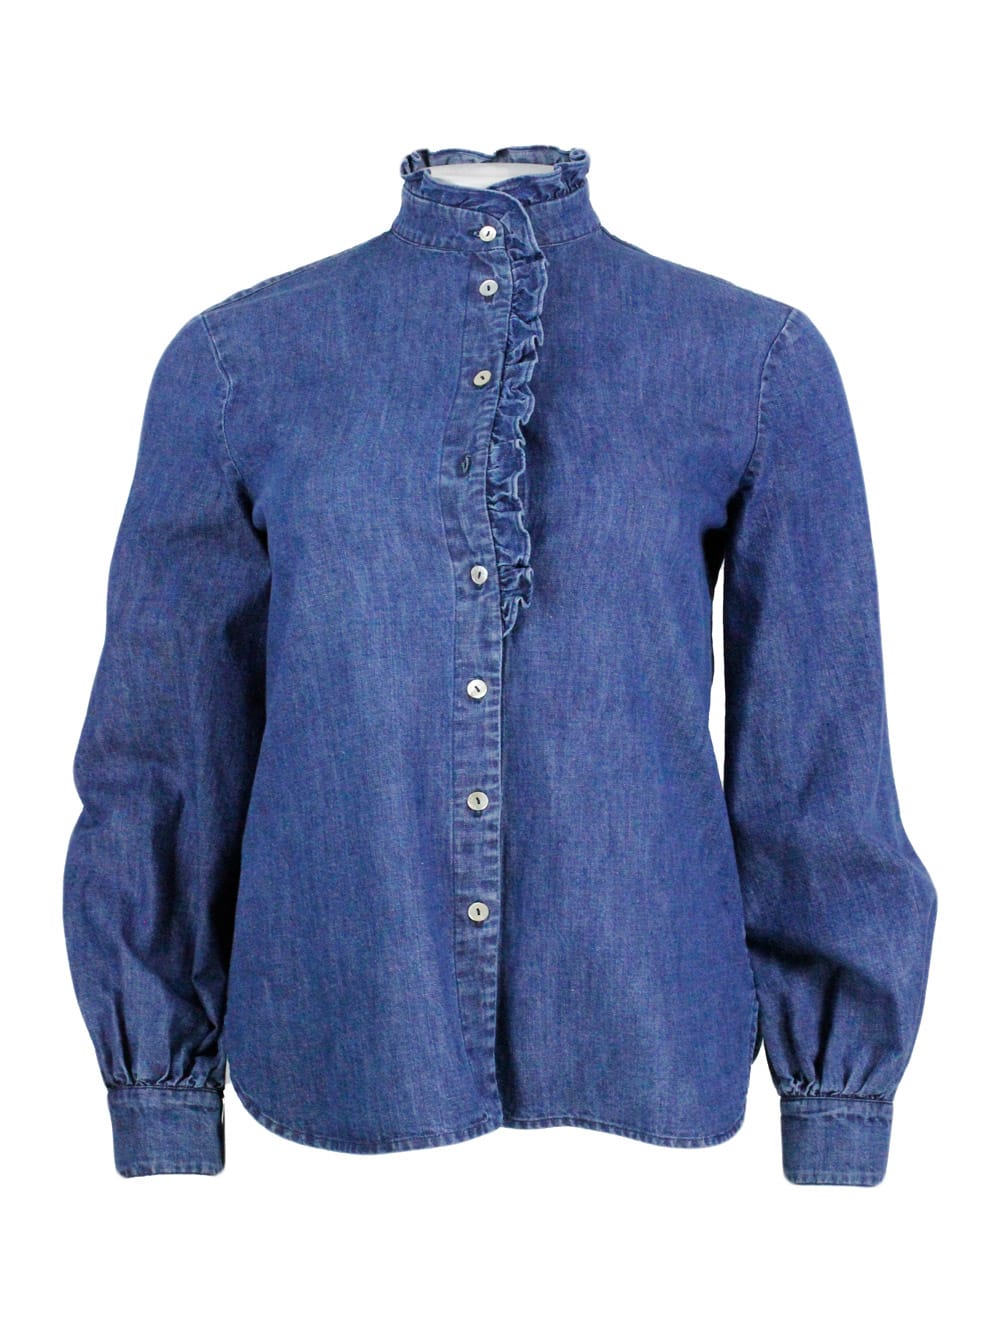 Long-sleeved Shirt In Fine Denim Embellished With Rouges On The Collar And Along The Buttons. Regular Line